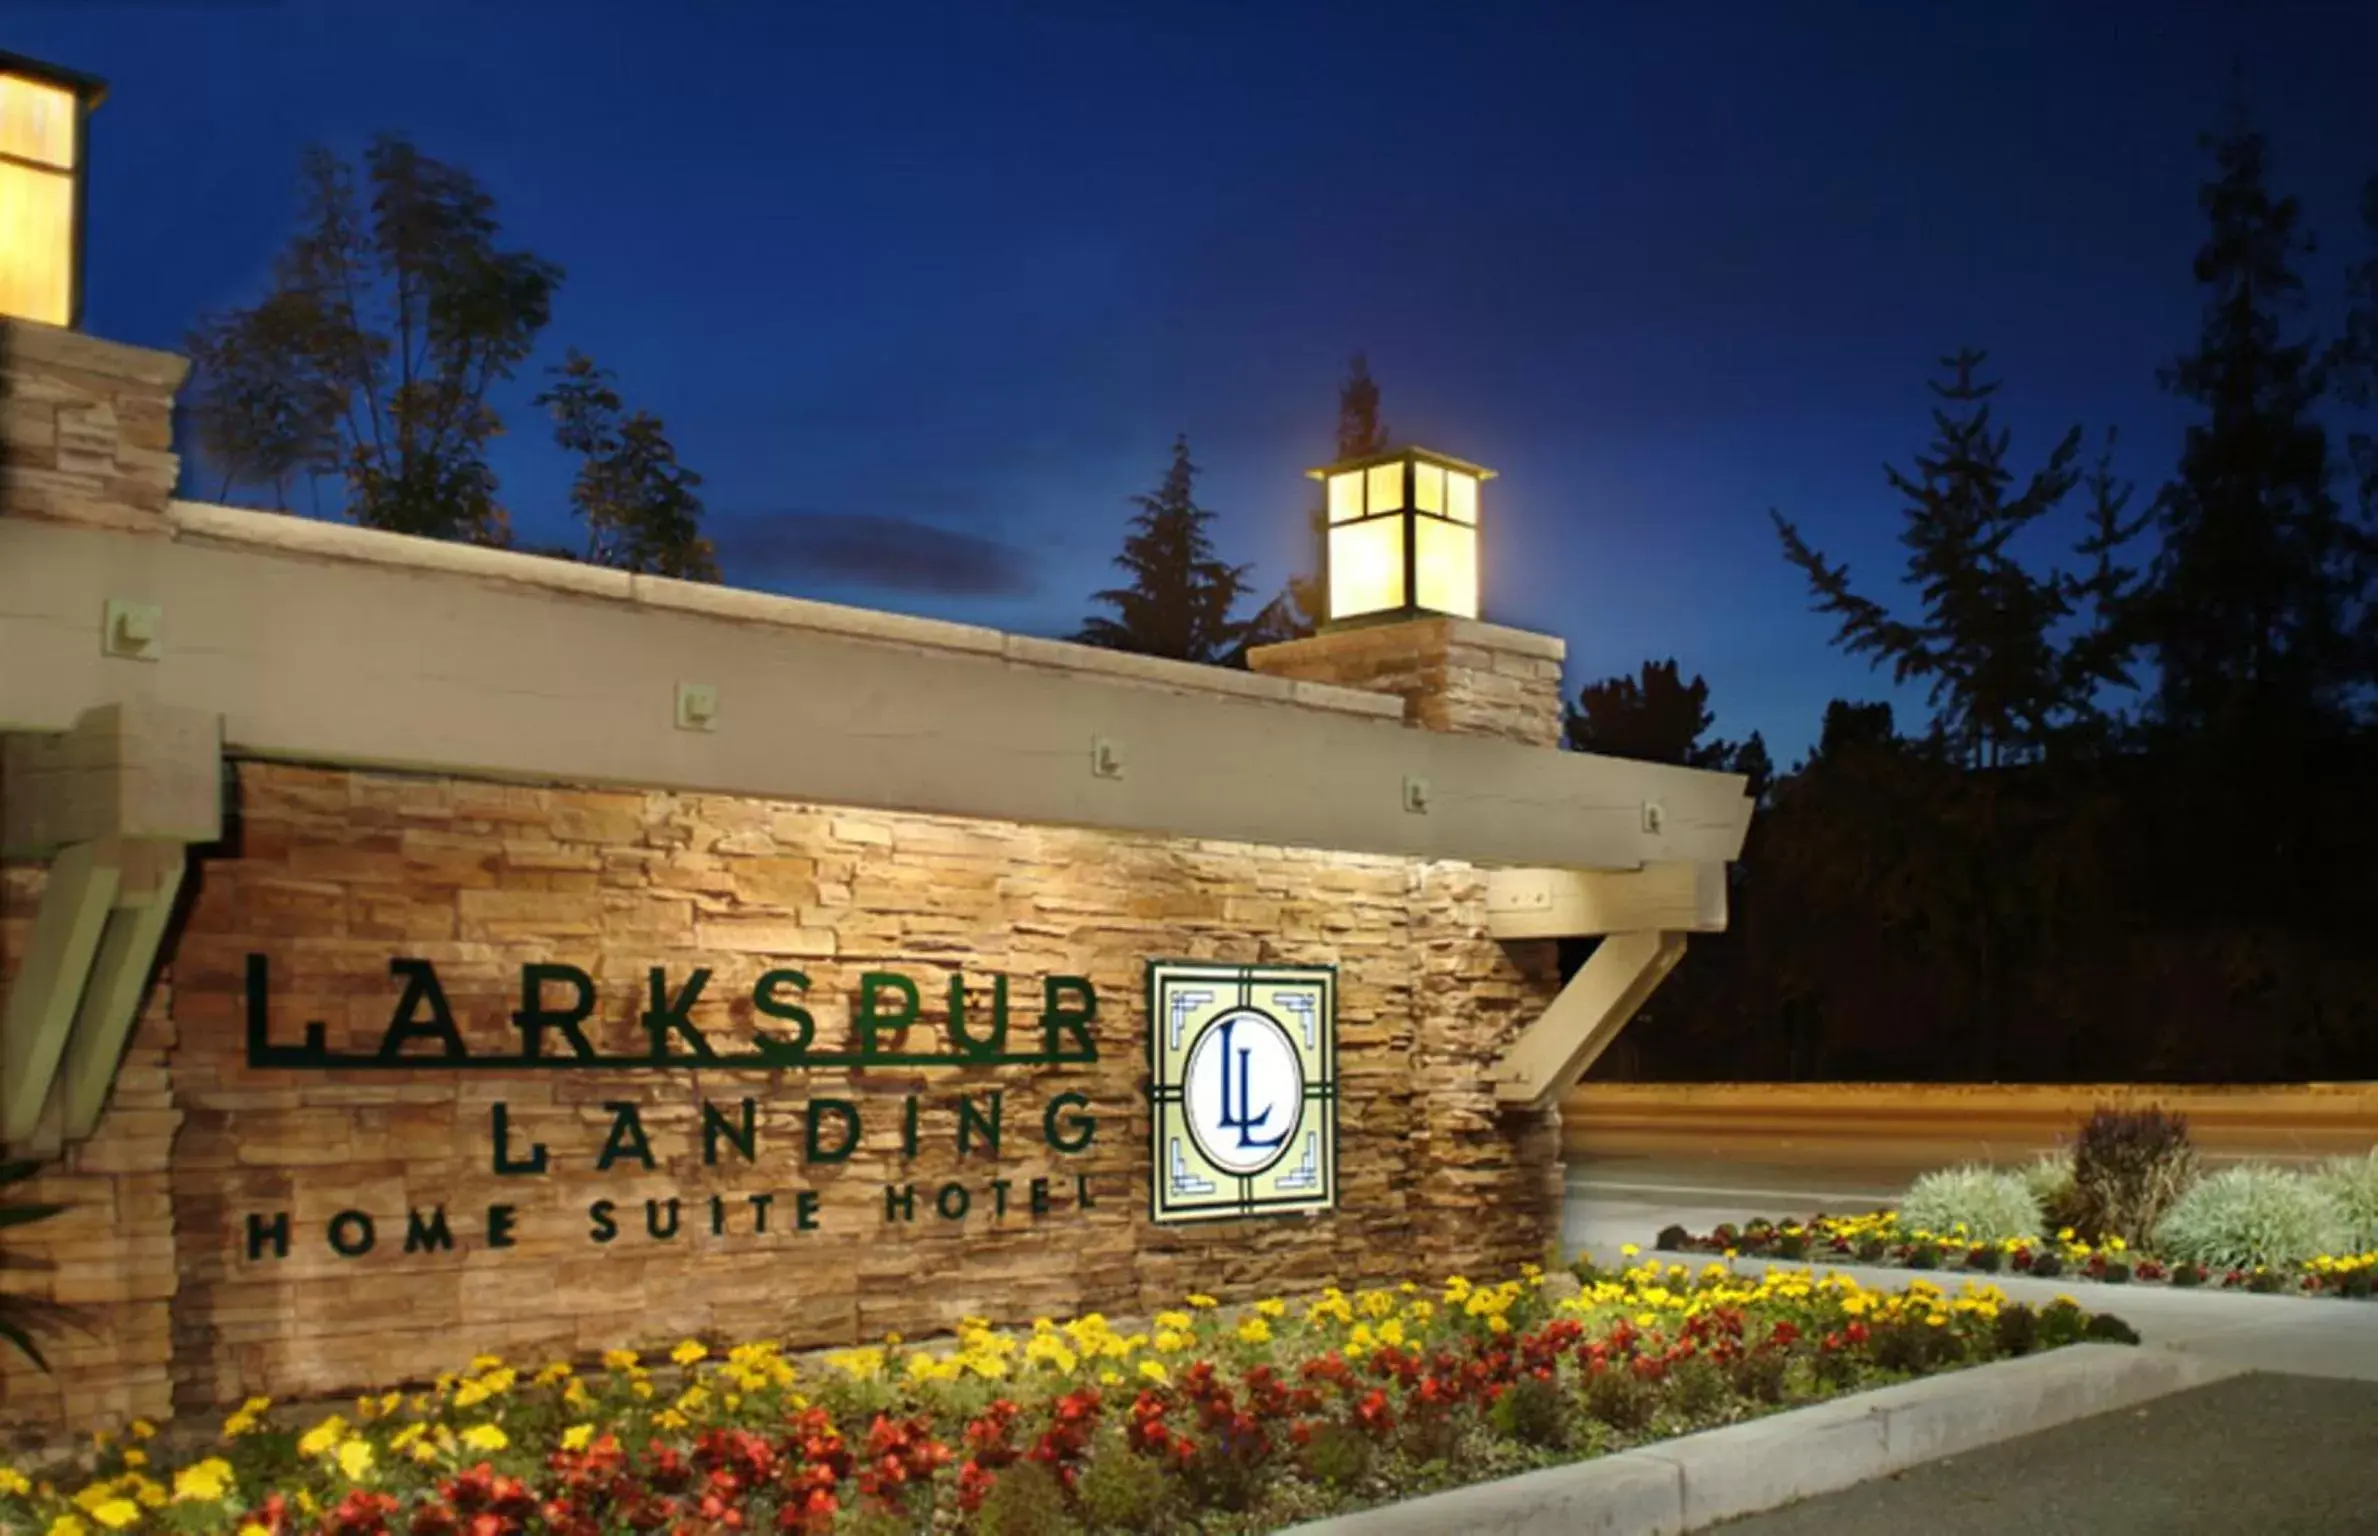 Property logo or sign, Property Building in Larkspur Landing Sunnyvale-An All-Suite Hotel